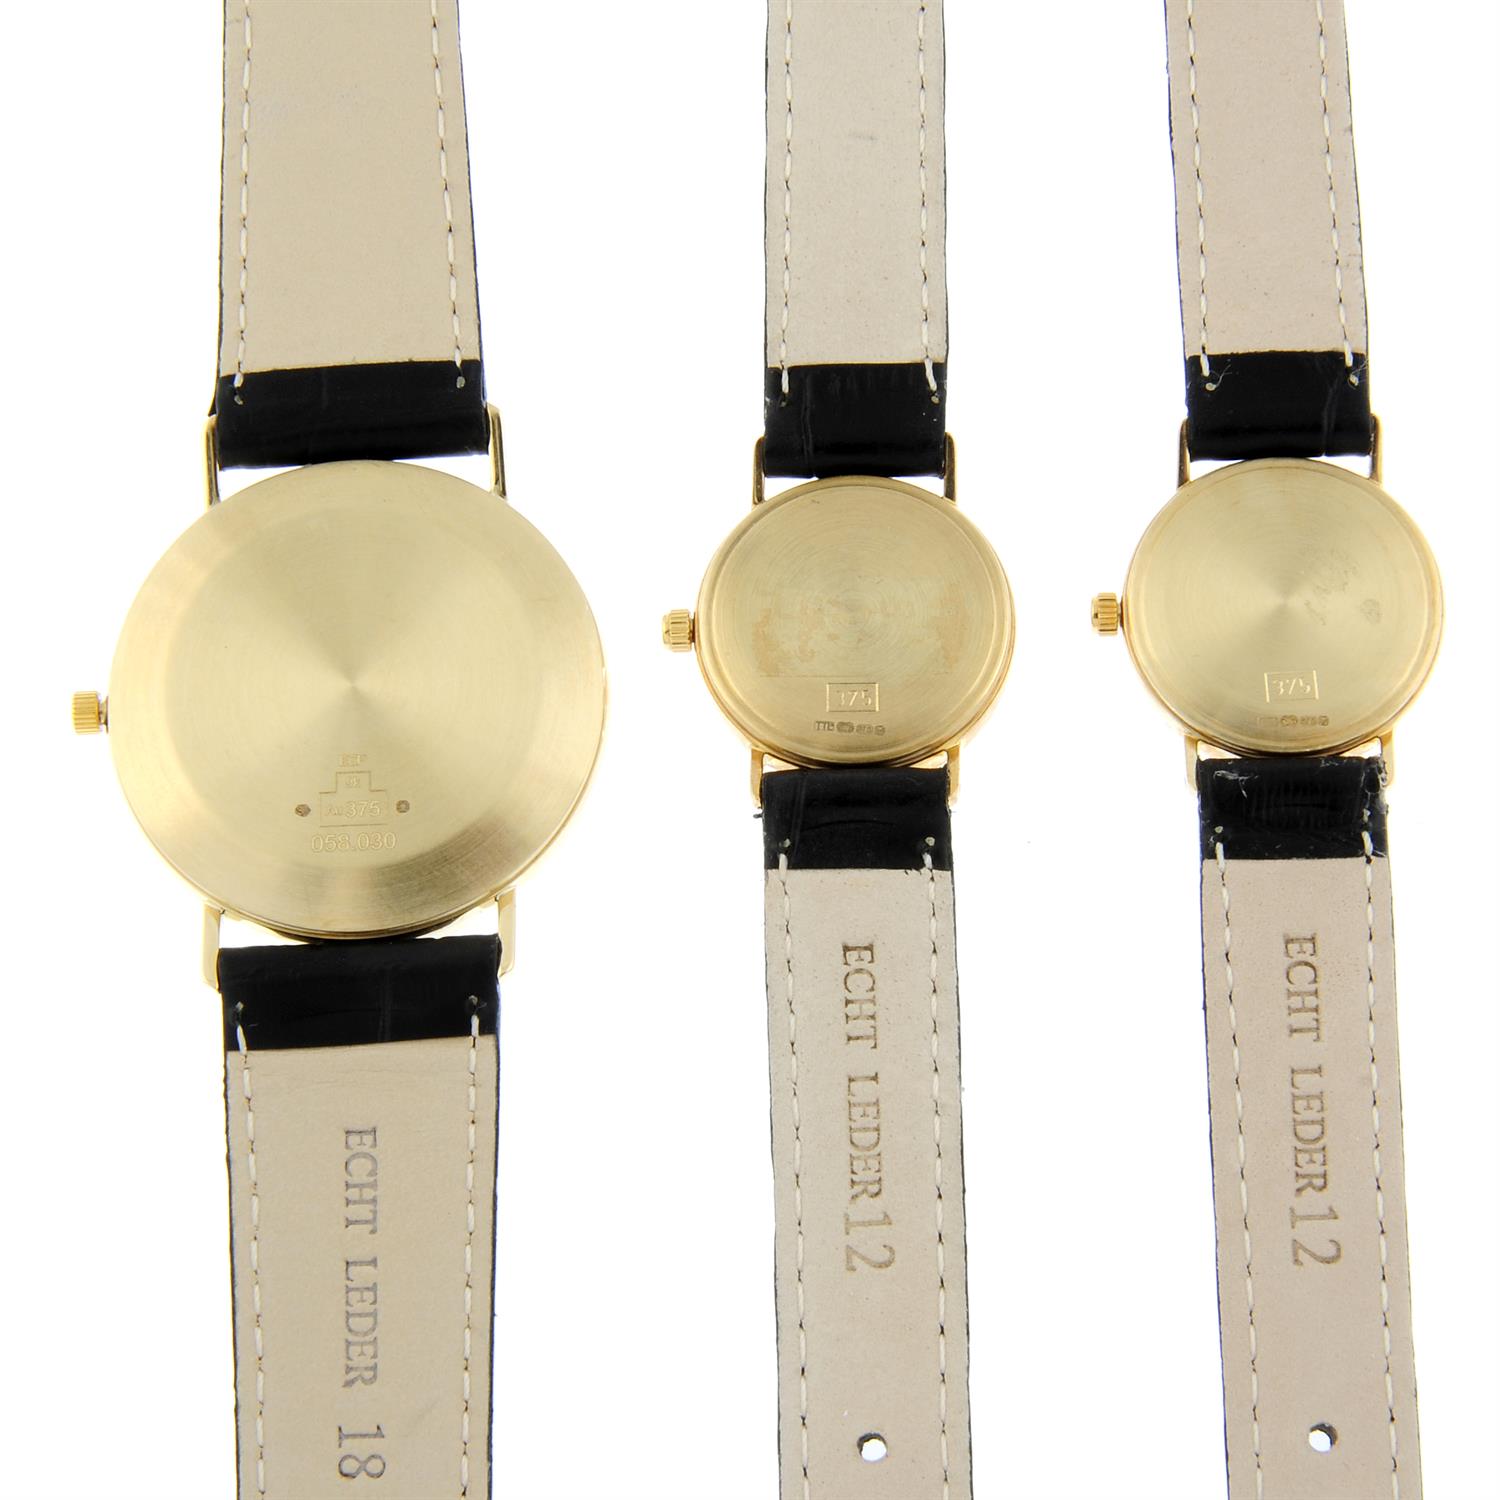 TRIGGS - a yellow metal wrist watch (33.5mm) with a 9ct gold Triggs wrist watch and a 9ct gold Jean - Image 4 of 4